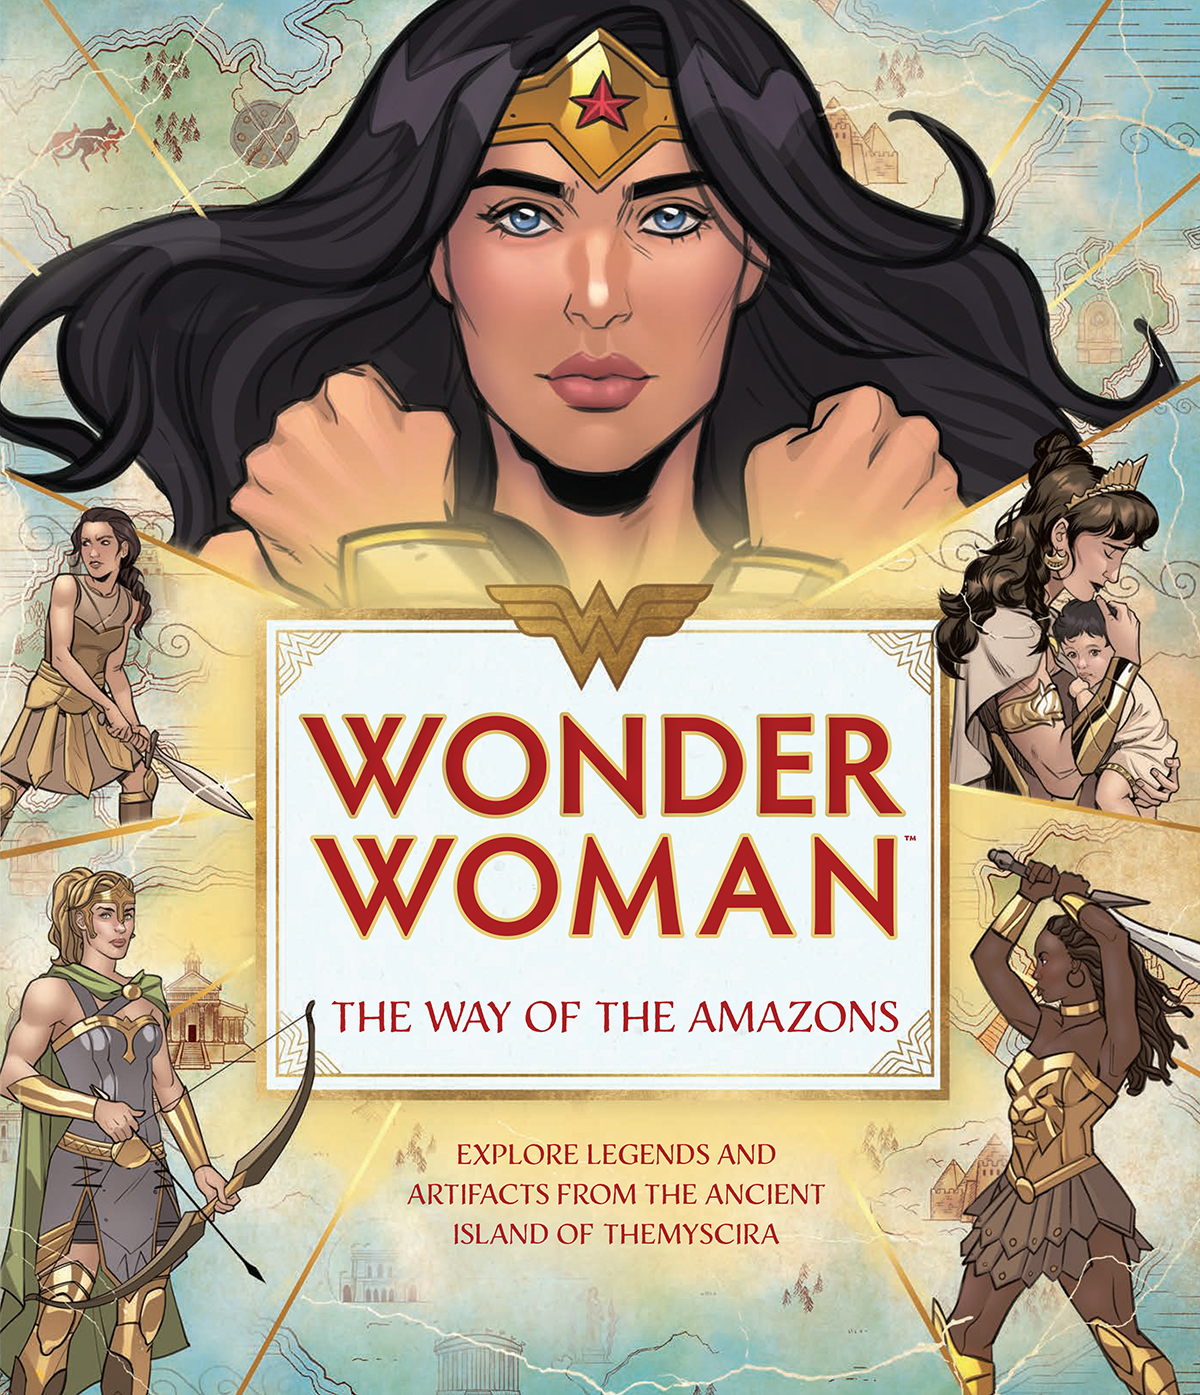 Exclusive Wonder Woman: The Way of the Amazons